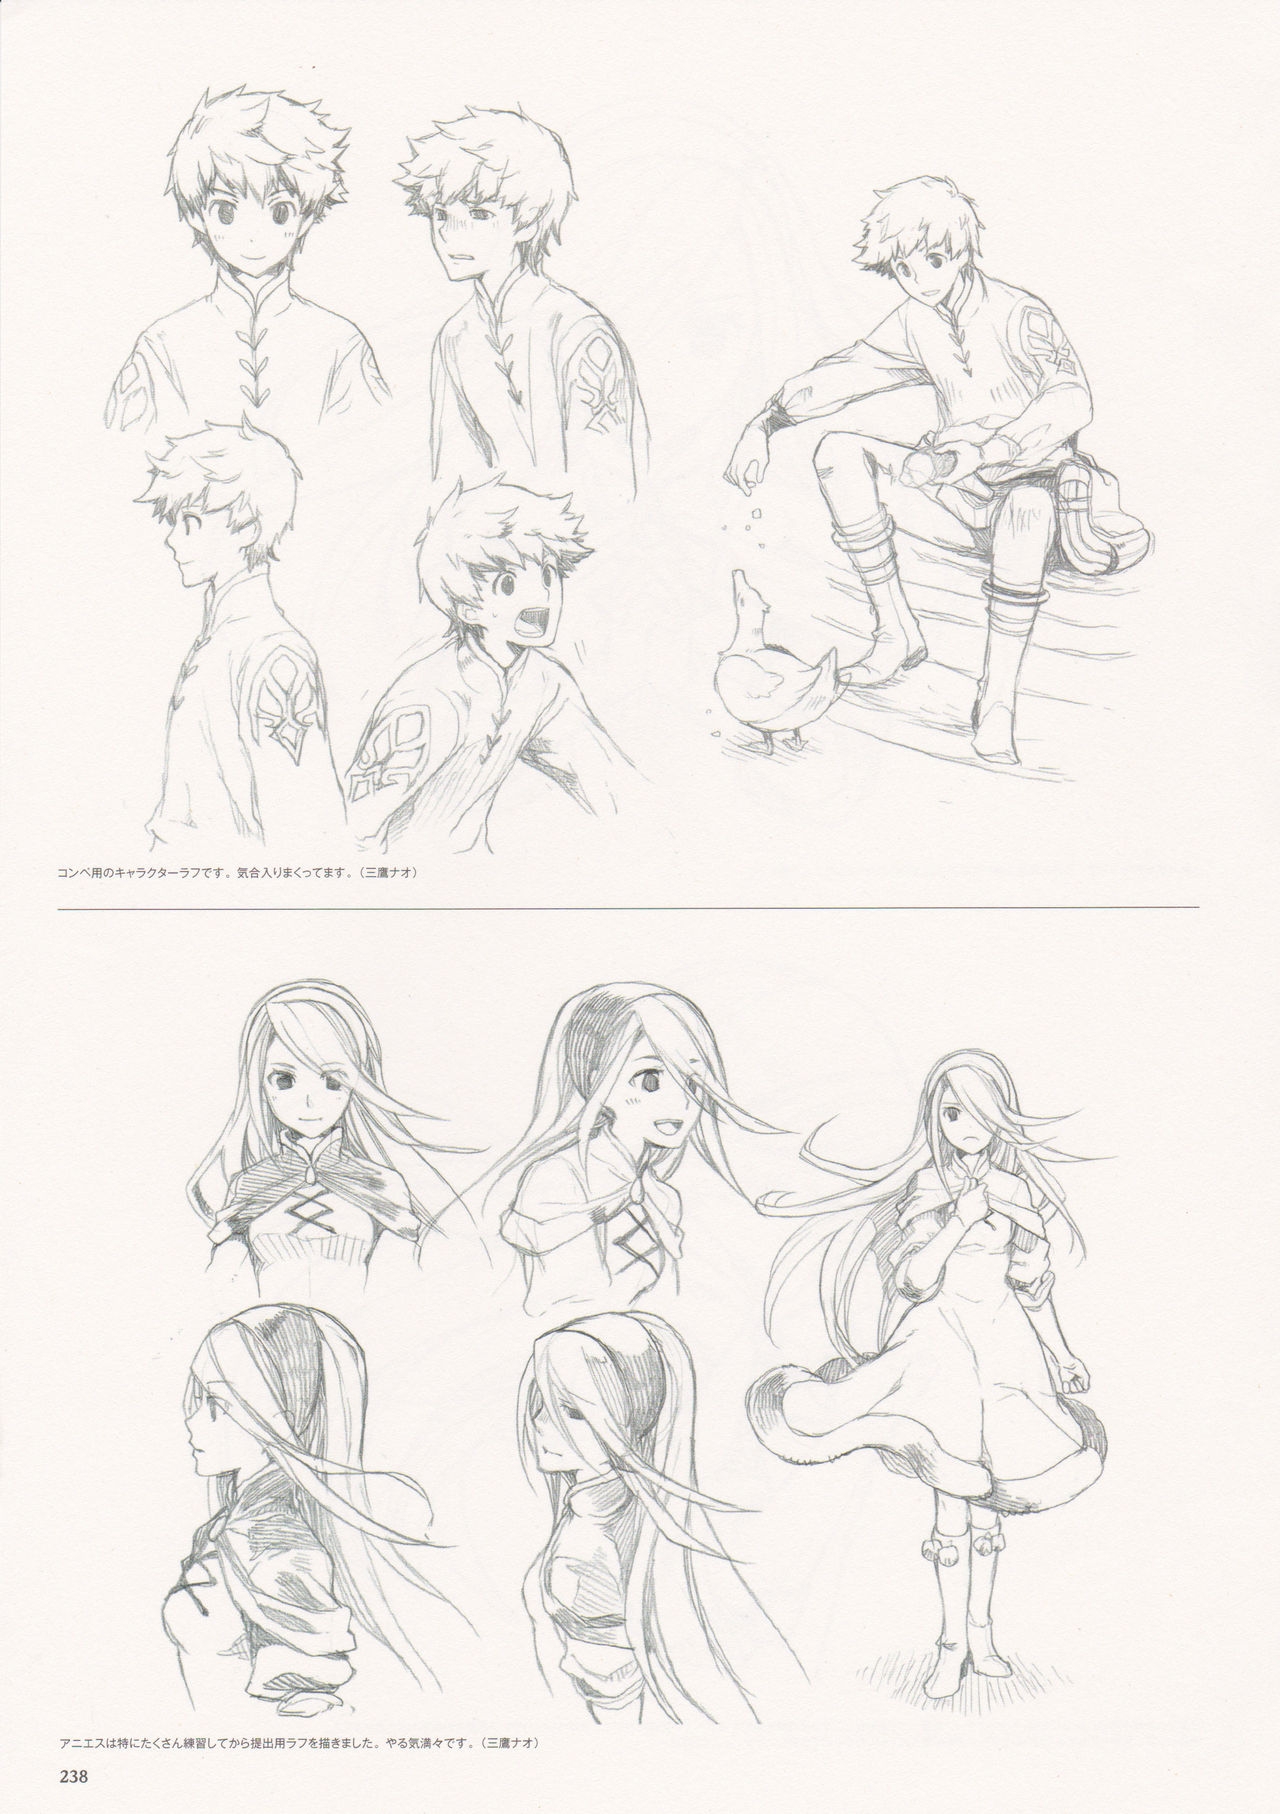 Bravely Second - End Layer - Design Works THE ART OF BRAVELY 2013-2015 237